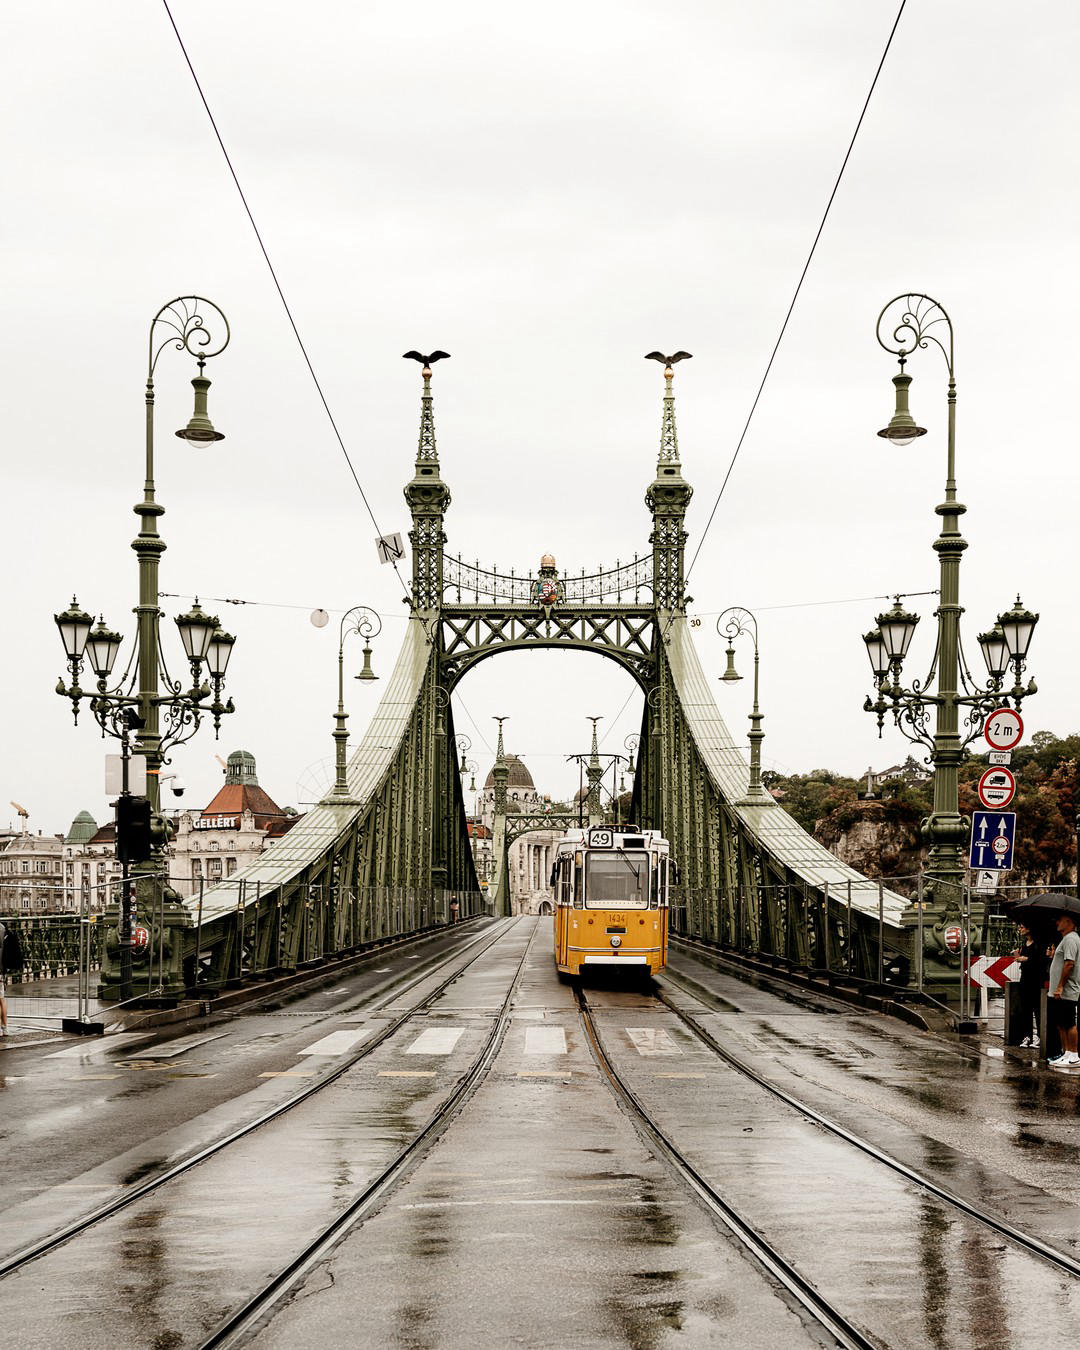 image  1 Jacintha Verdegaal - The famous 'chain bridge' in Budapest is unfortunately closed for renovation, b